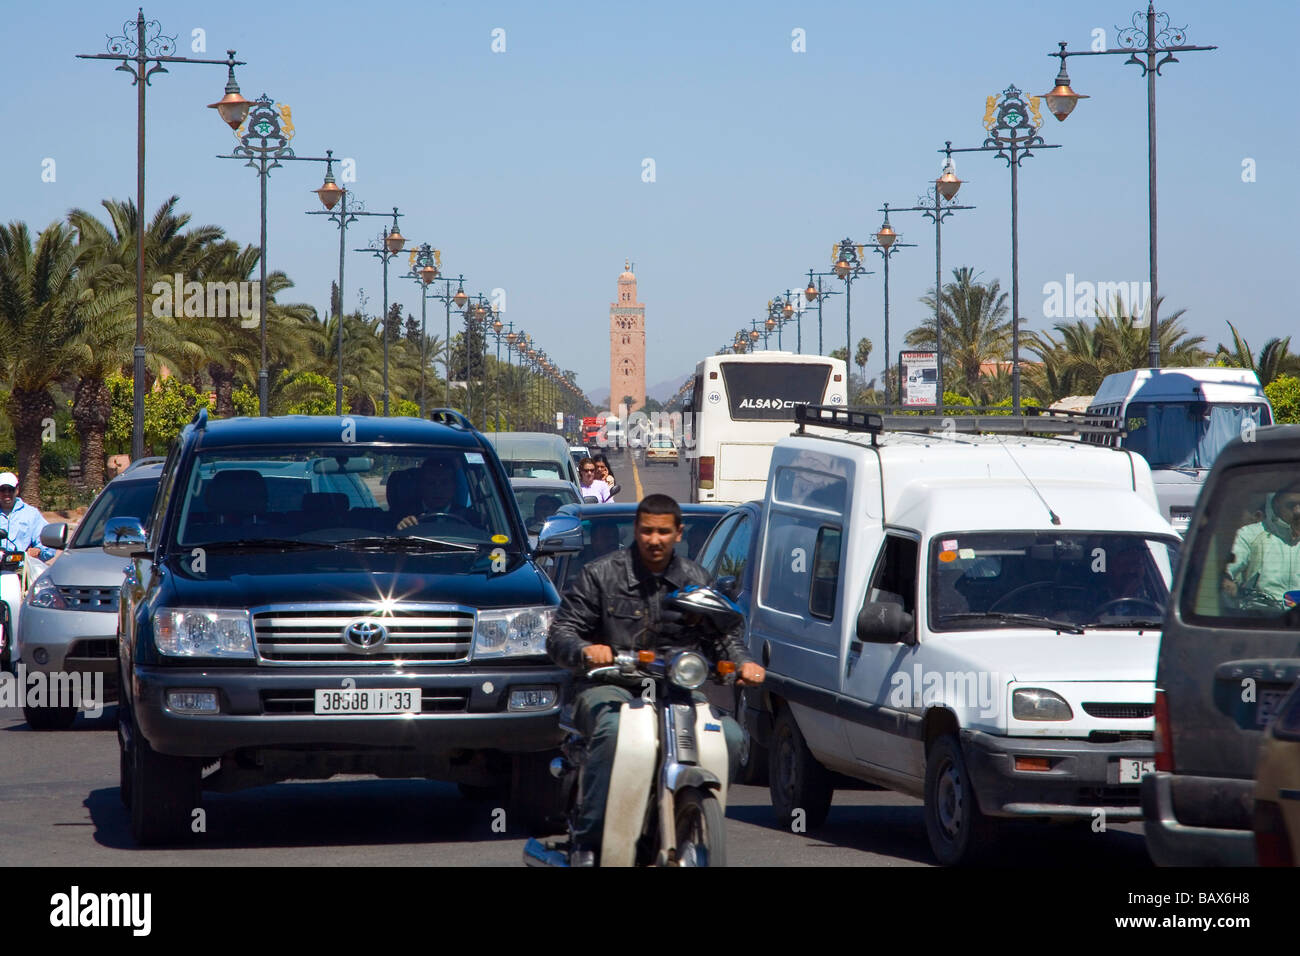 Traffic at Marrakech in Morocco Stock Photo